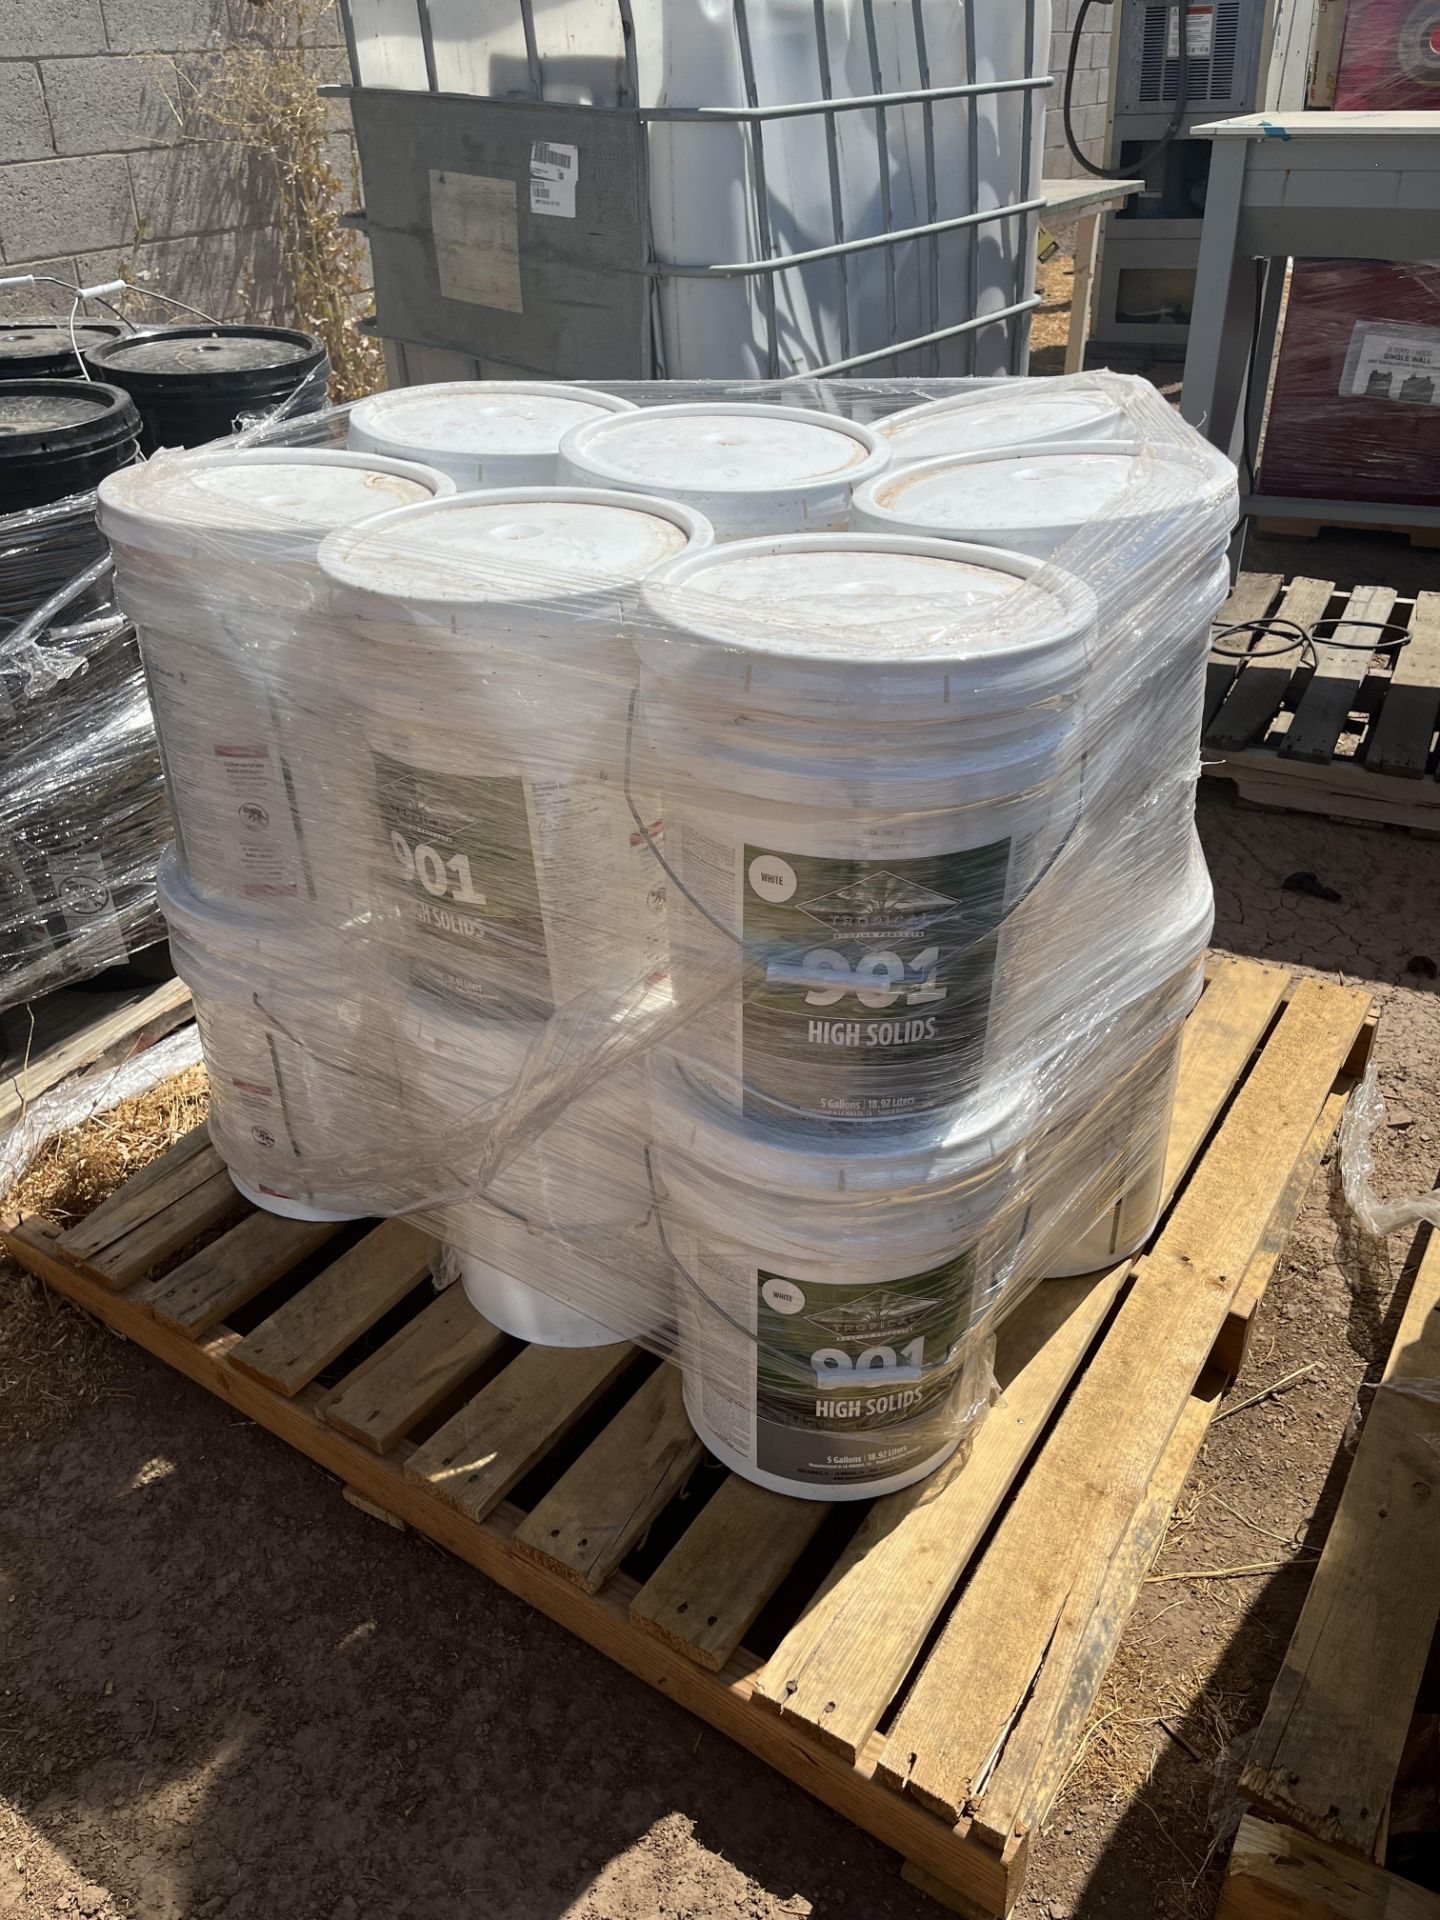 LOT PALLET OF TROPICAL ROOFING PRODUCTS 901 HIGH SOLIDS ELASTOMERIC ROOF COATING, 5 GAL BUCKETS